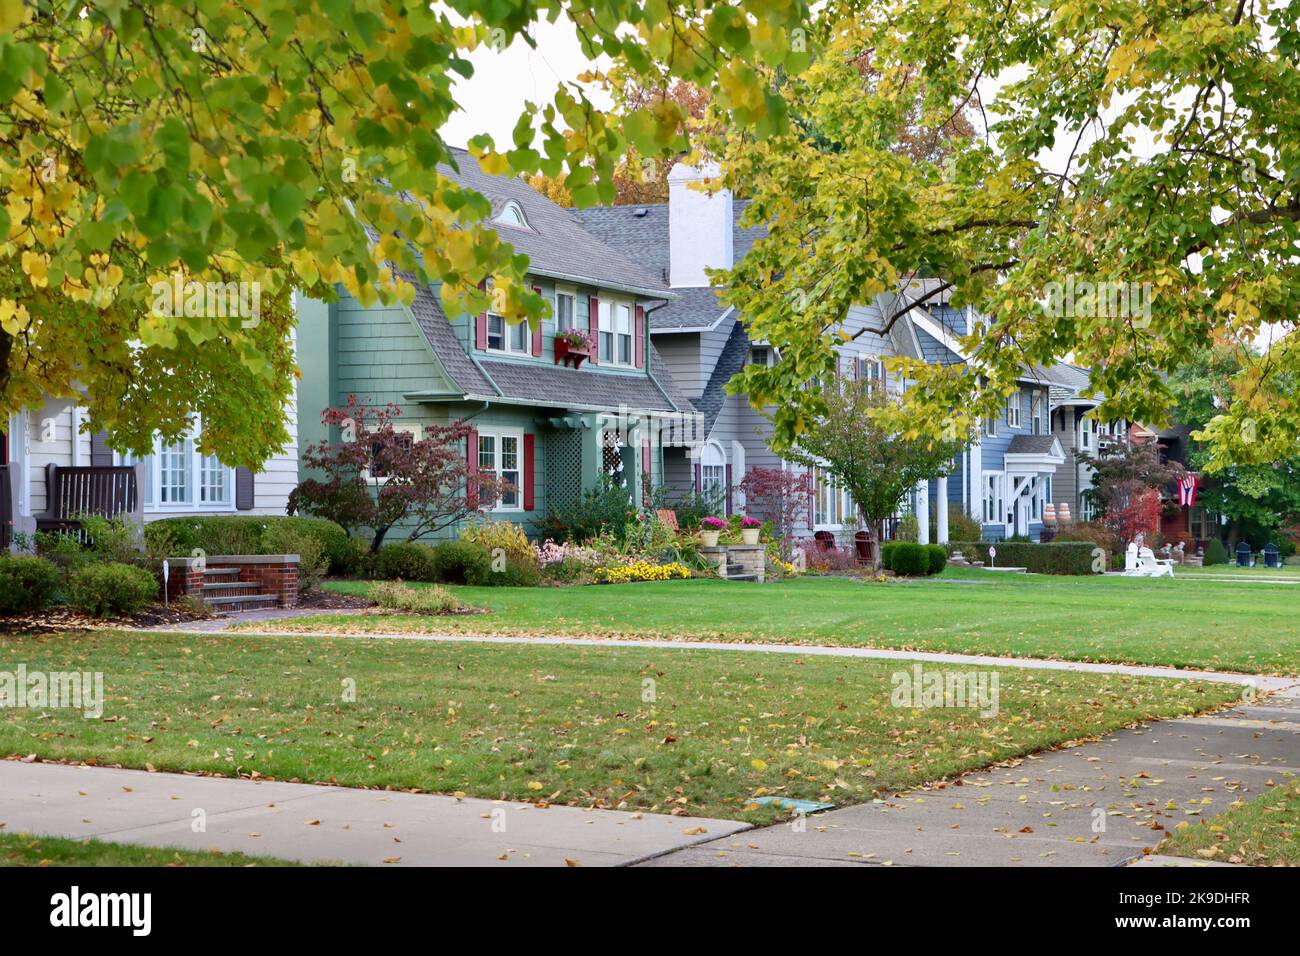 Homes and home ownership on residential street in Lakewood, Ohio Stock Photo